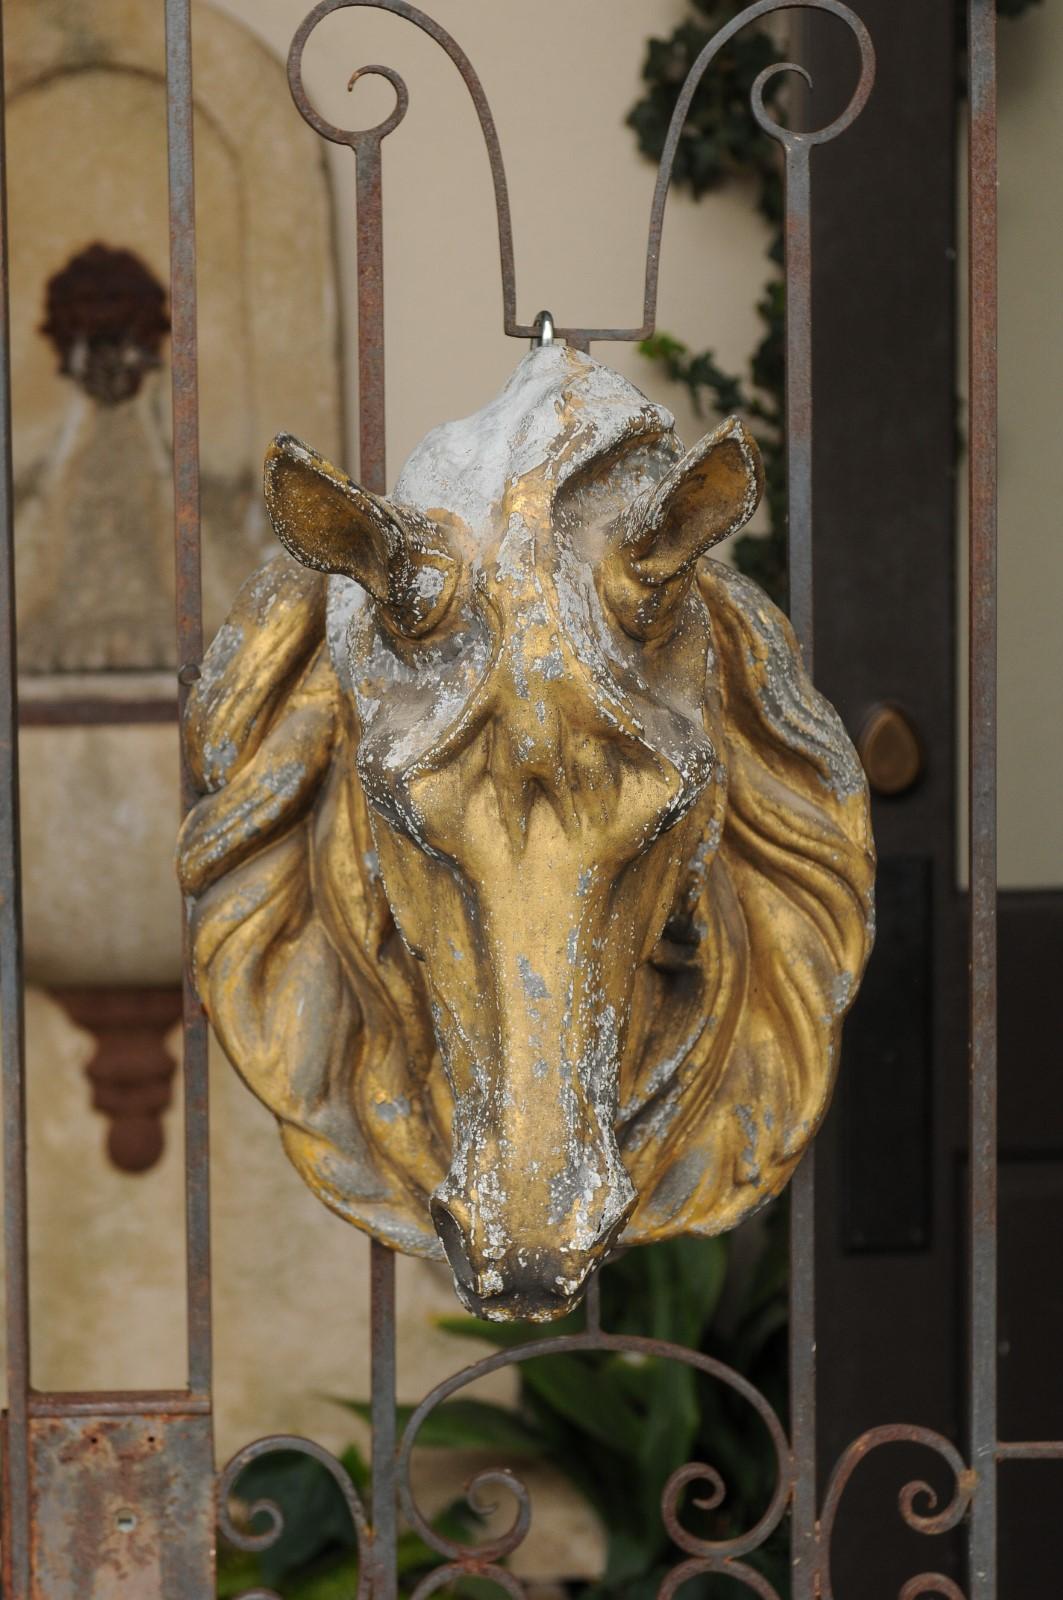 A French gilt zinc decorative horse head from the early 20th century with great details on the mane and musculature. Born in France during the Belle Époque era in the early years of the 20th century, this gilt zinc horse head strikes with its